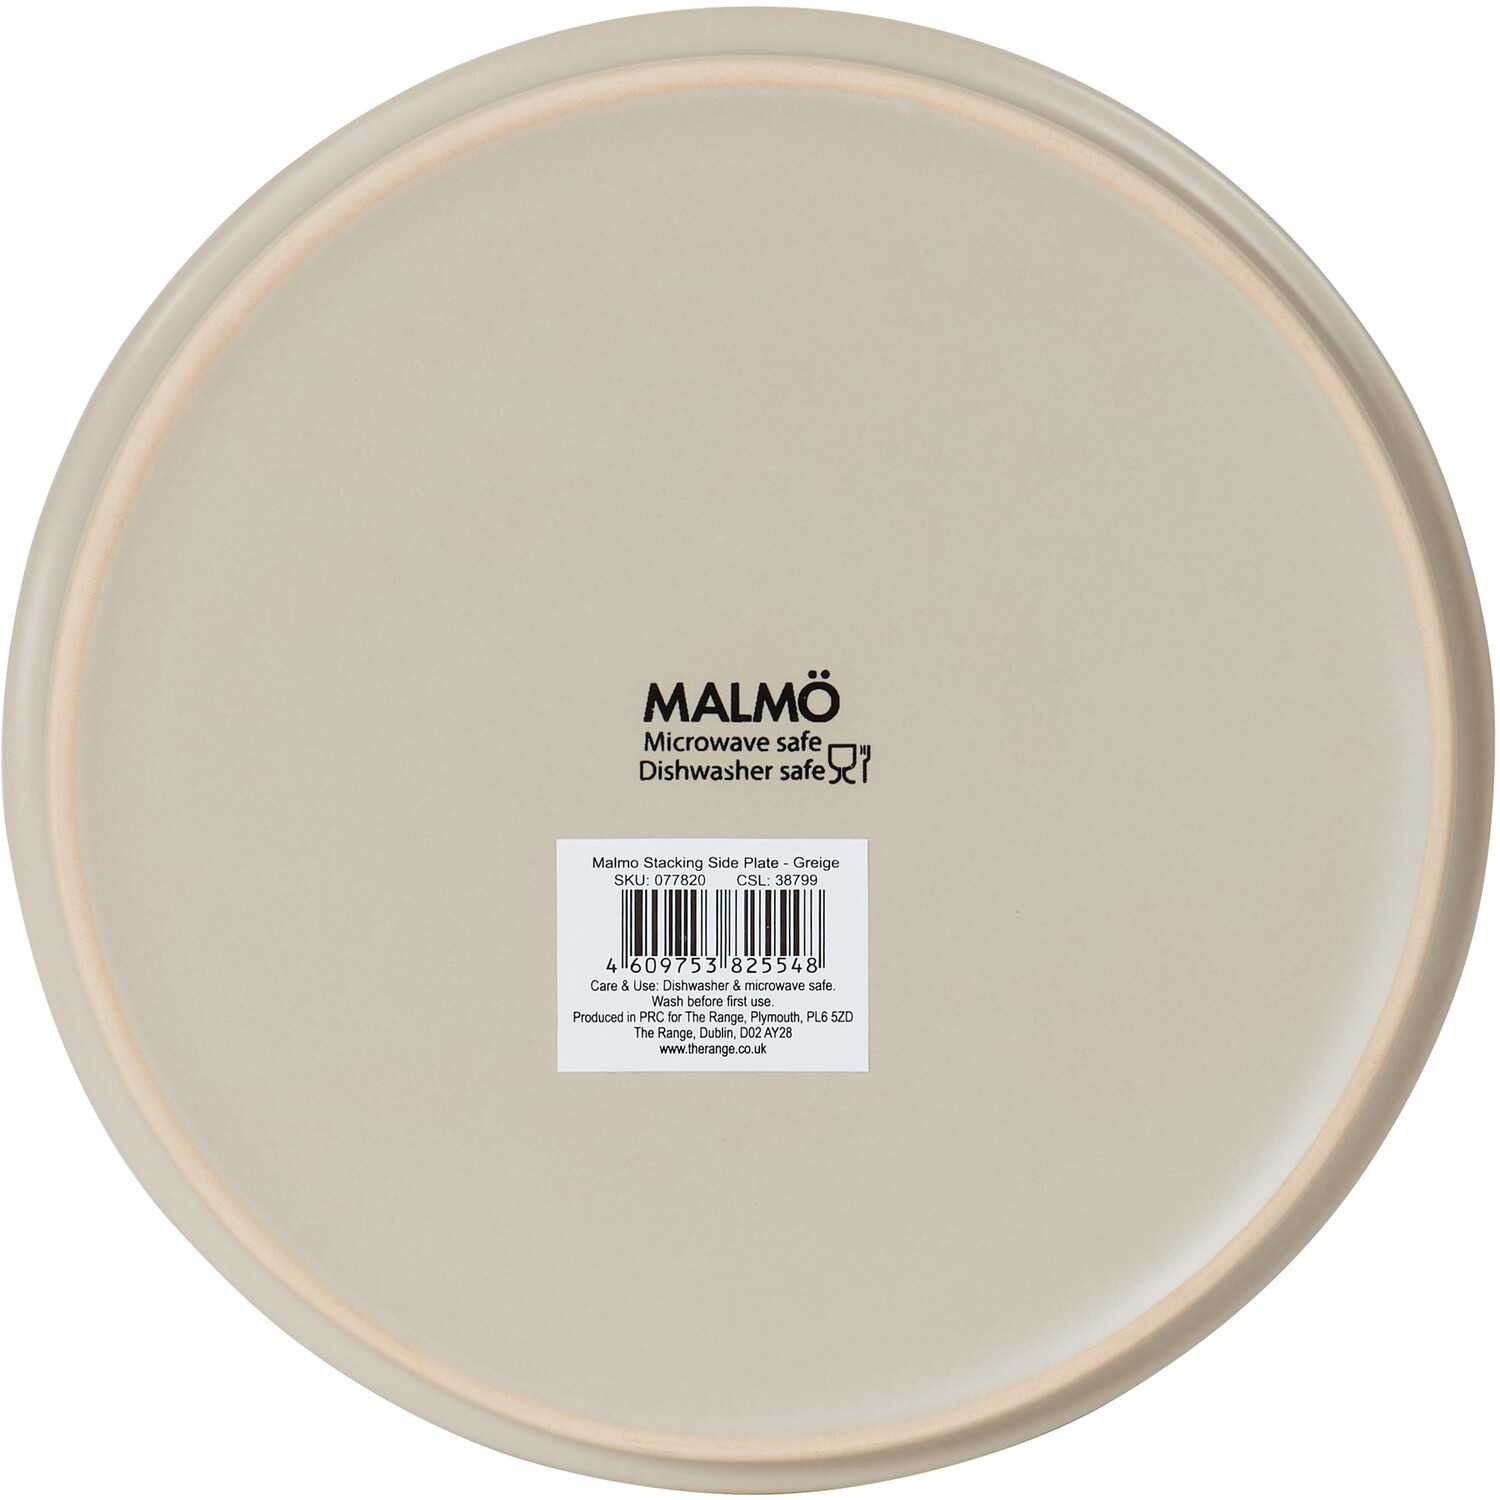 Malmo Stacking Side Plate - Greige Image 3